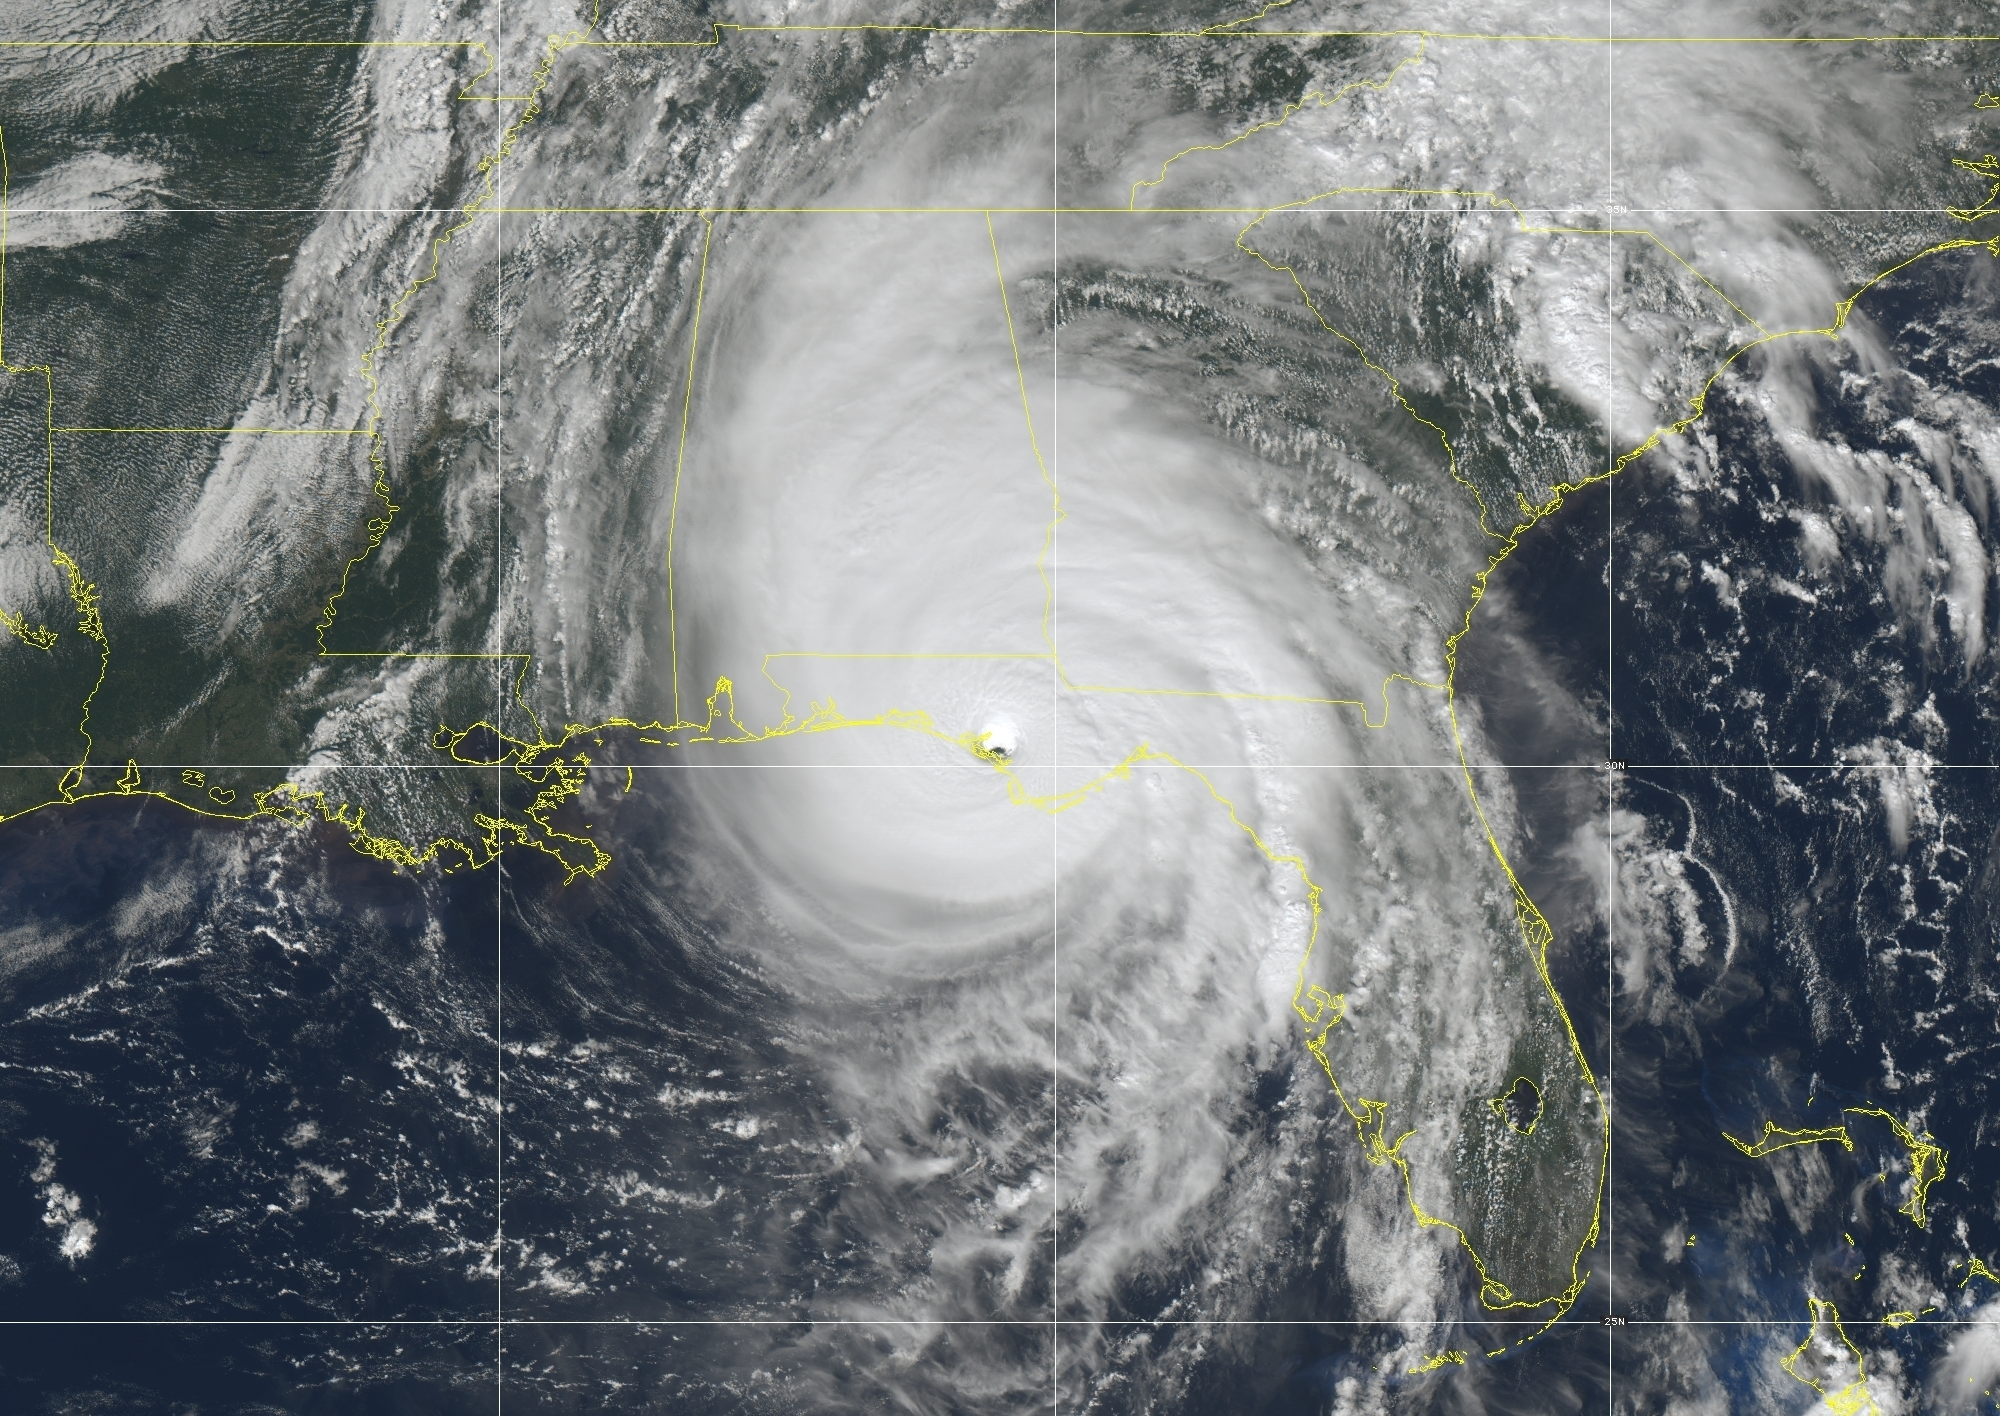 There is simply no precedent for Hurricane Michael